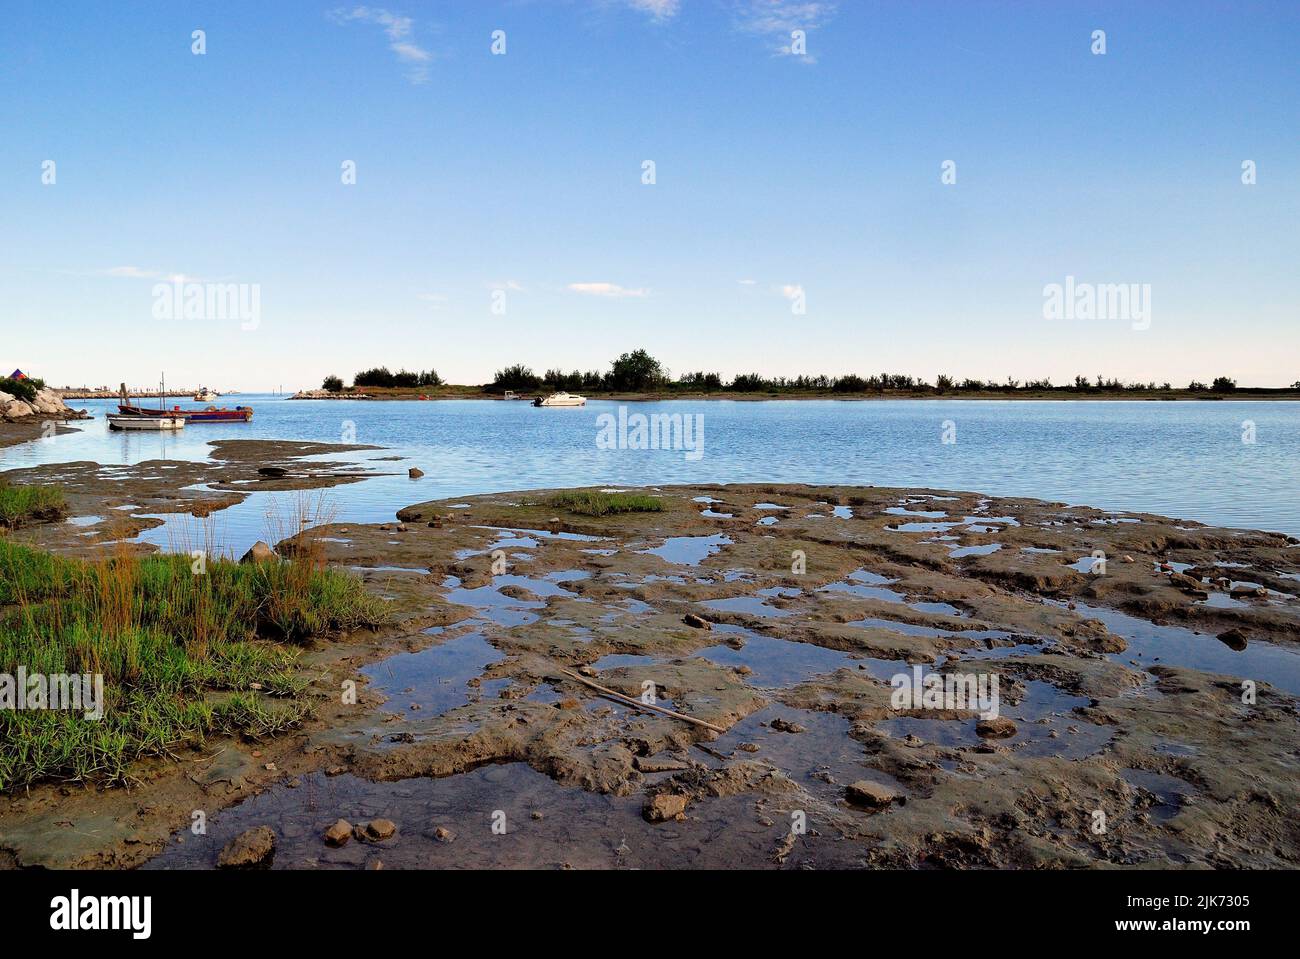 Veneto, Italy, The Laguna del Mort (En. Dead Man Lagoon). It is located at the mouth of the Piave river. The lagoon is characterized by shallow and calm waters with shallow and sandy bottoms rich in phytoplankton, where mussels, clams, oysters, crabs, mullets, plaice and sole live, there are numerous water birds. Stock Photo